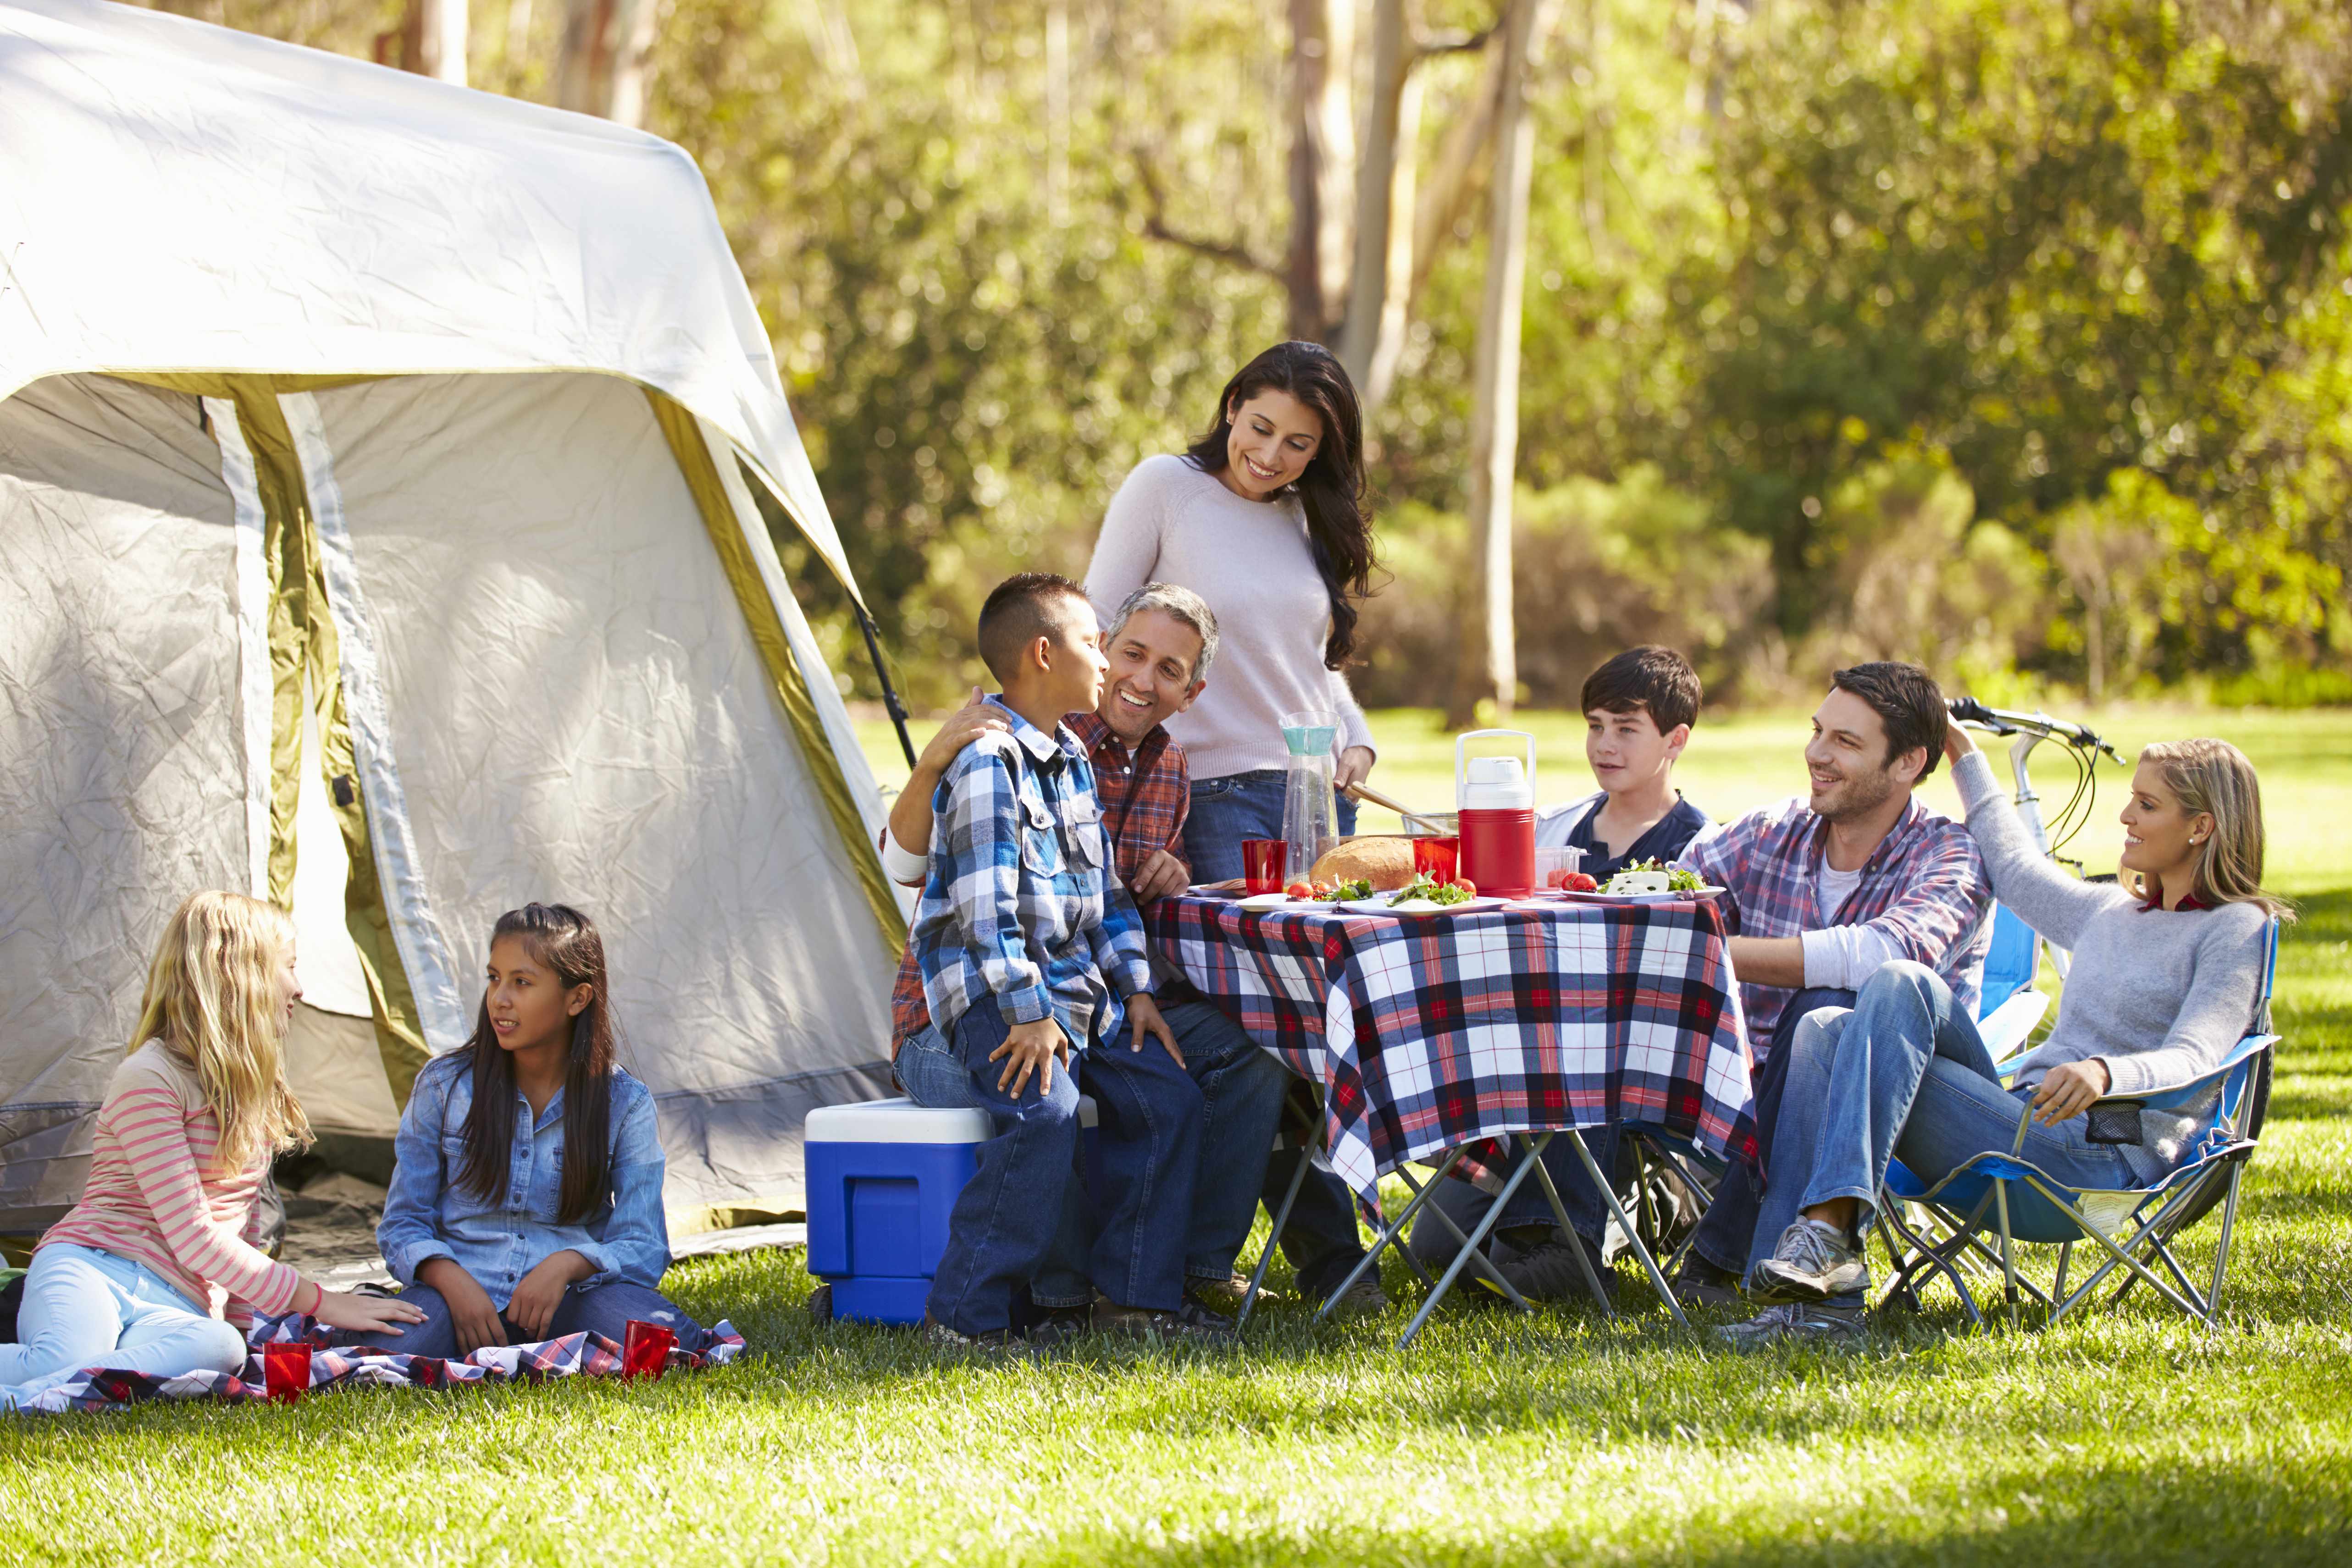 a family with friends outside camping and having an outdoor picnic